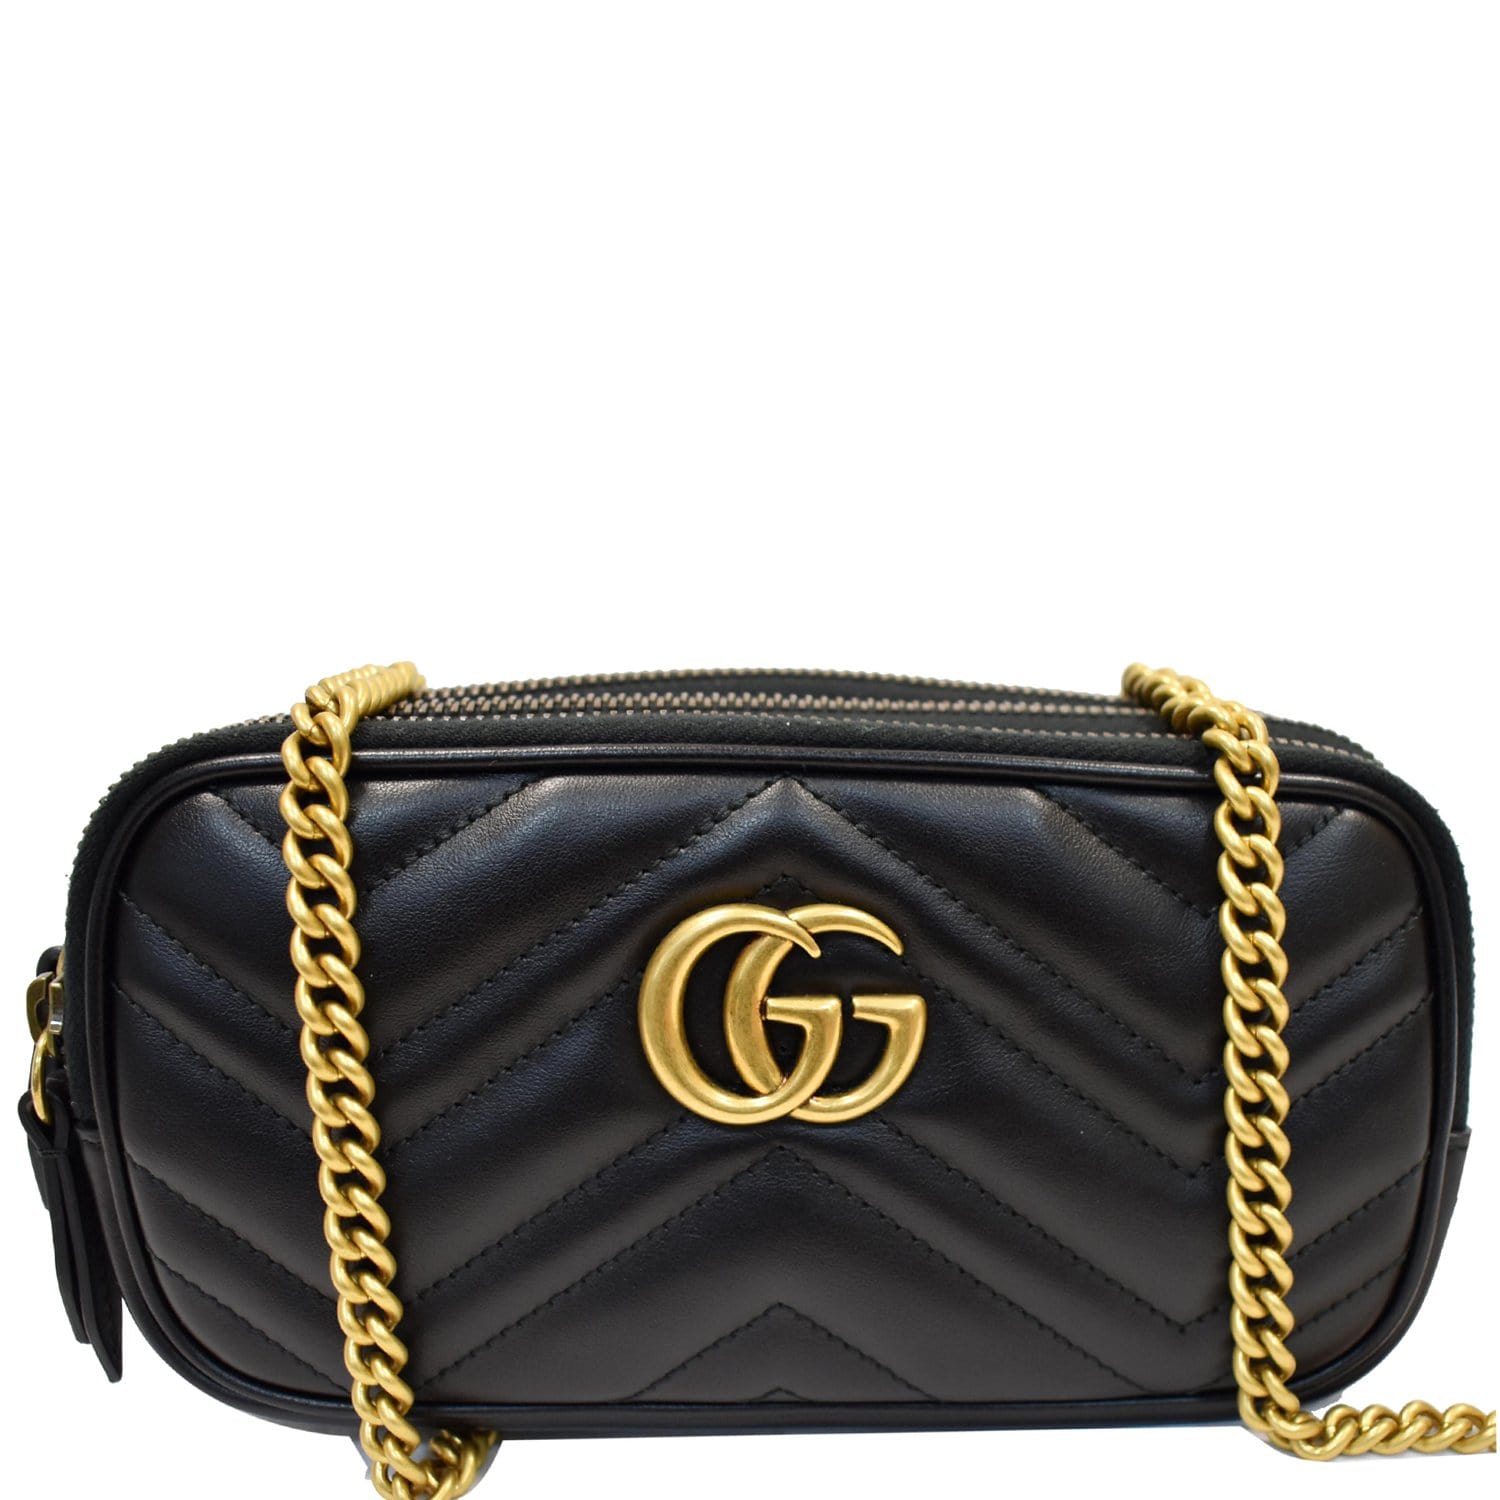 GG Marmont mini chain bag in light grey leather